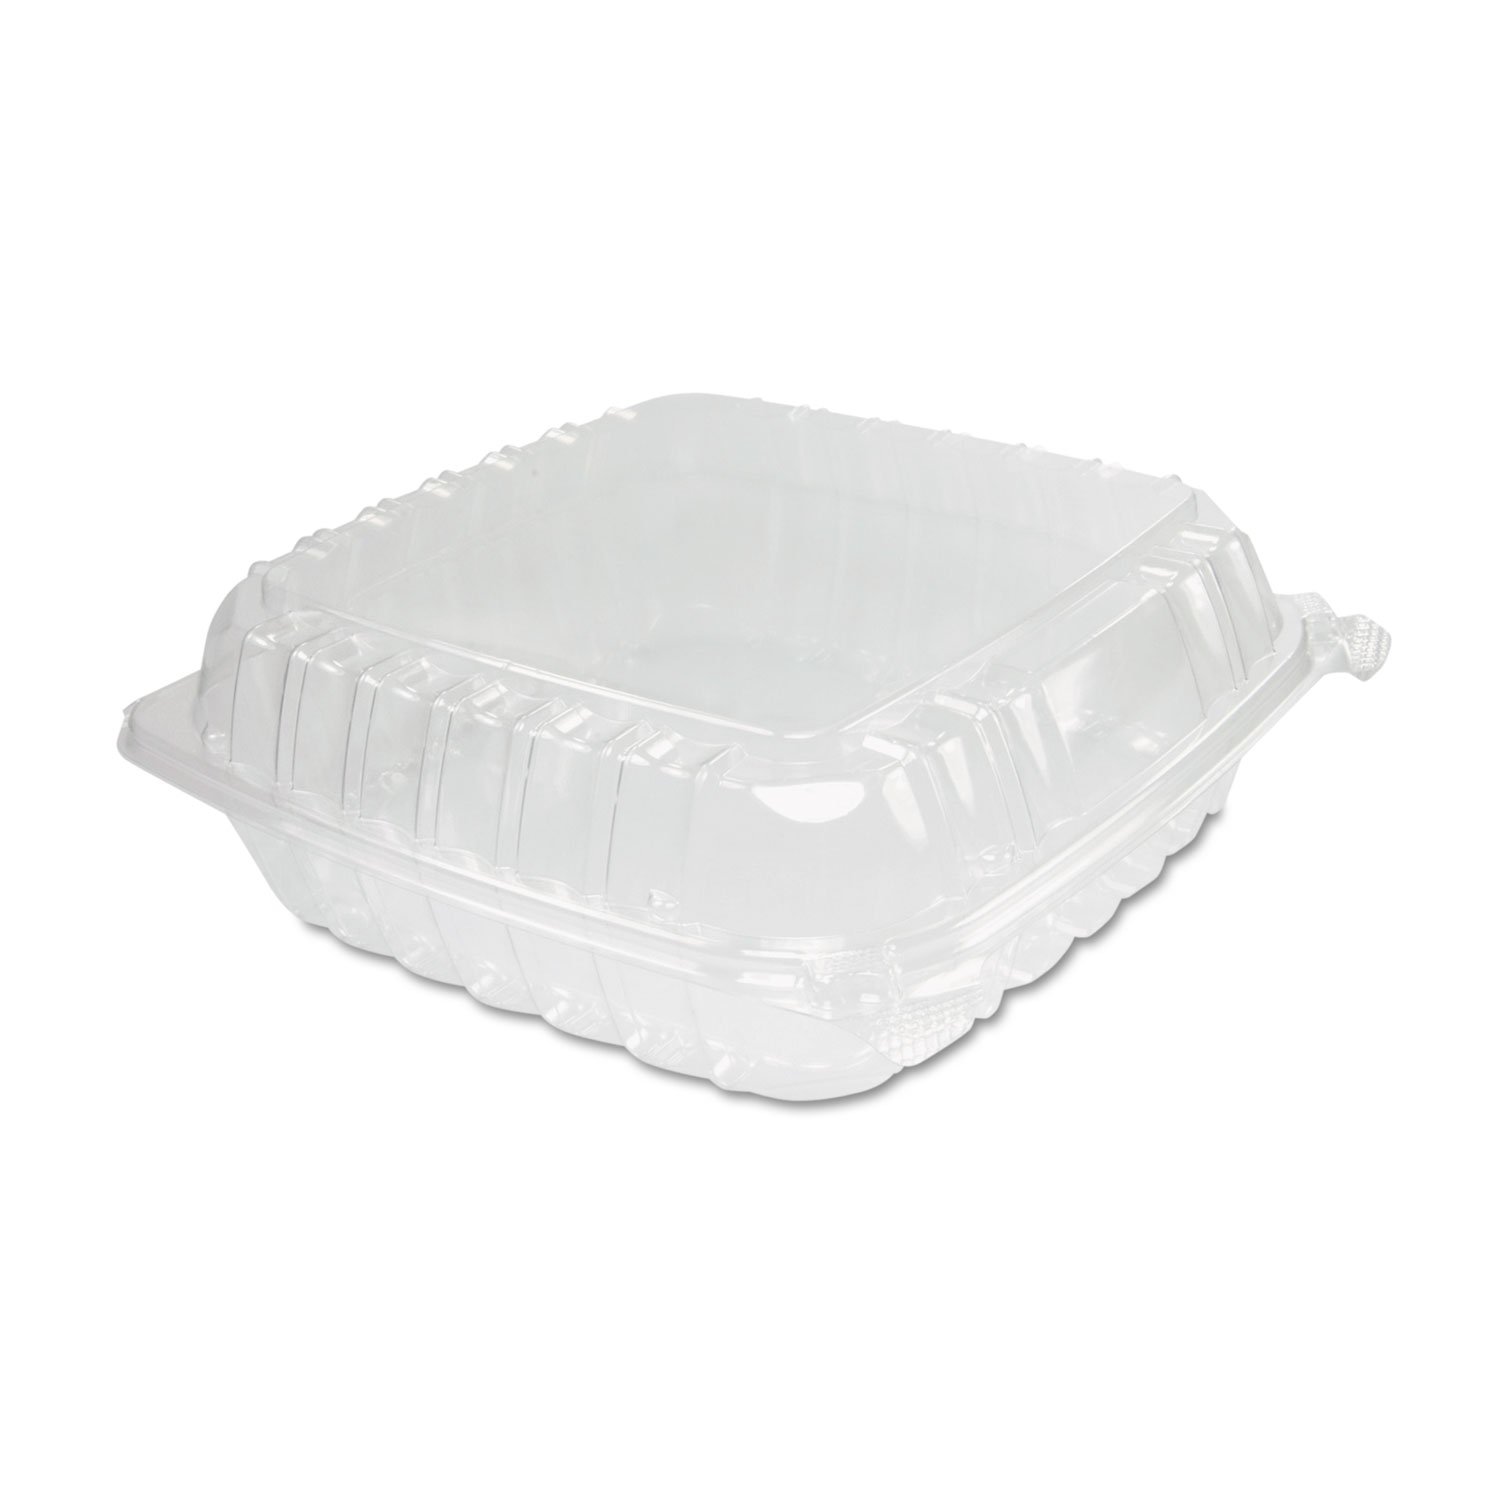  Dart C95PST1 ClearSeal Plastic Hinged Container, Large, 9x9-1/2x3, Clear, 100/Bag (DCCC95PST1) 